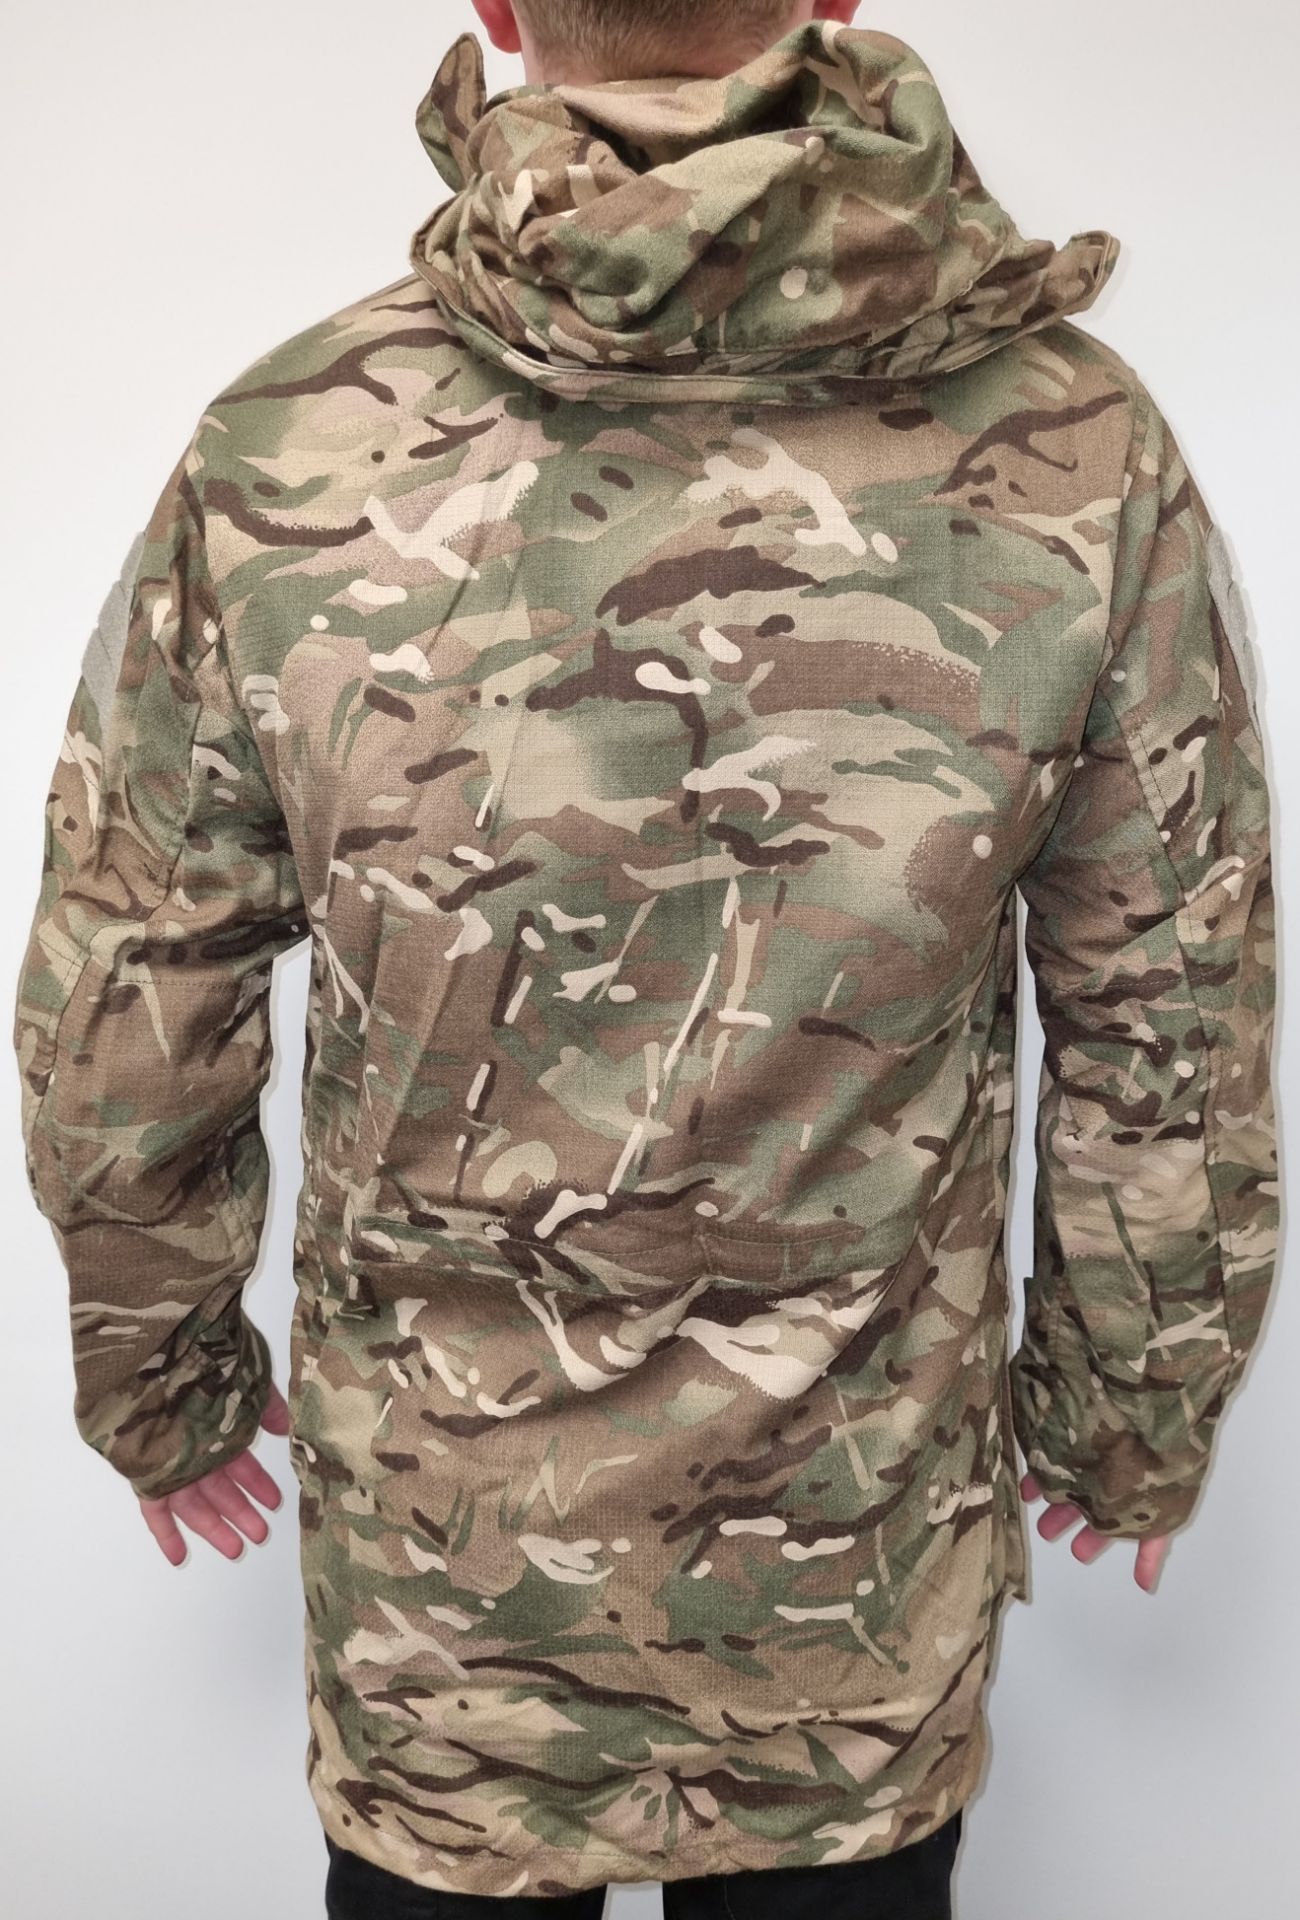 45x British Army MTP windproof smocks - mixed grades and sizes - Image 3 of 13